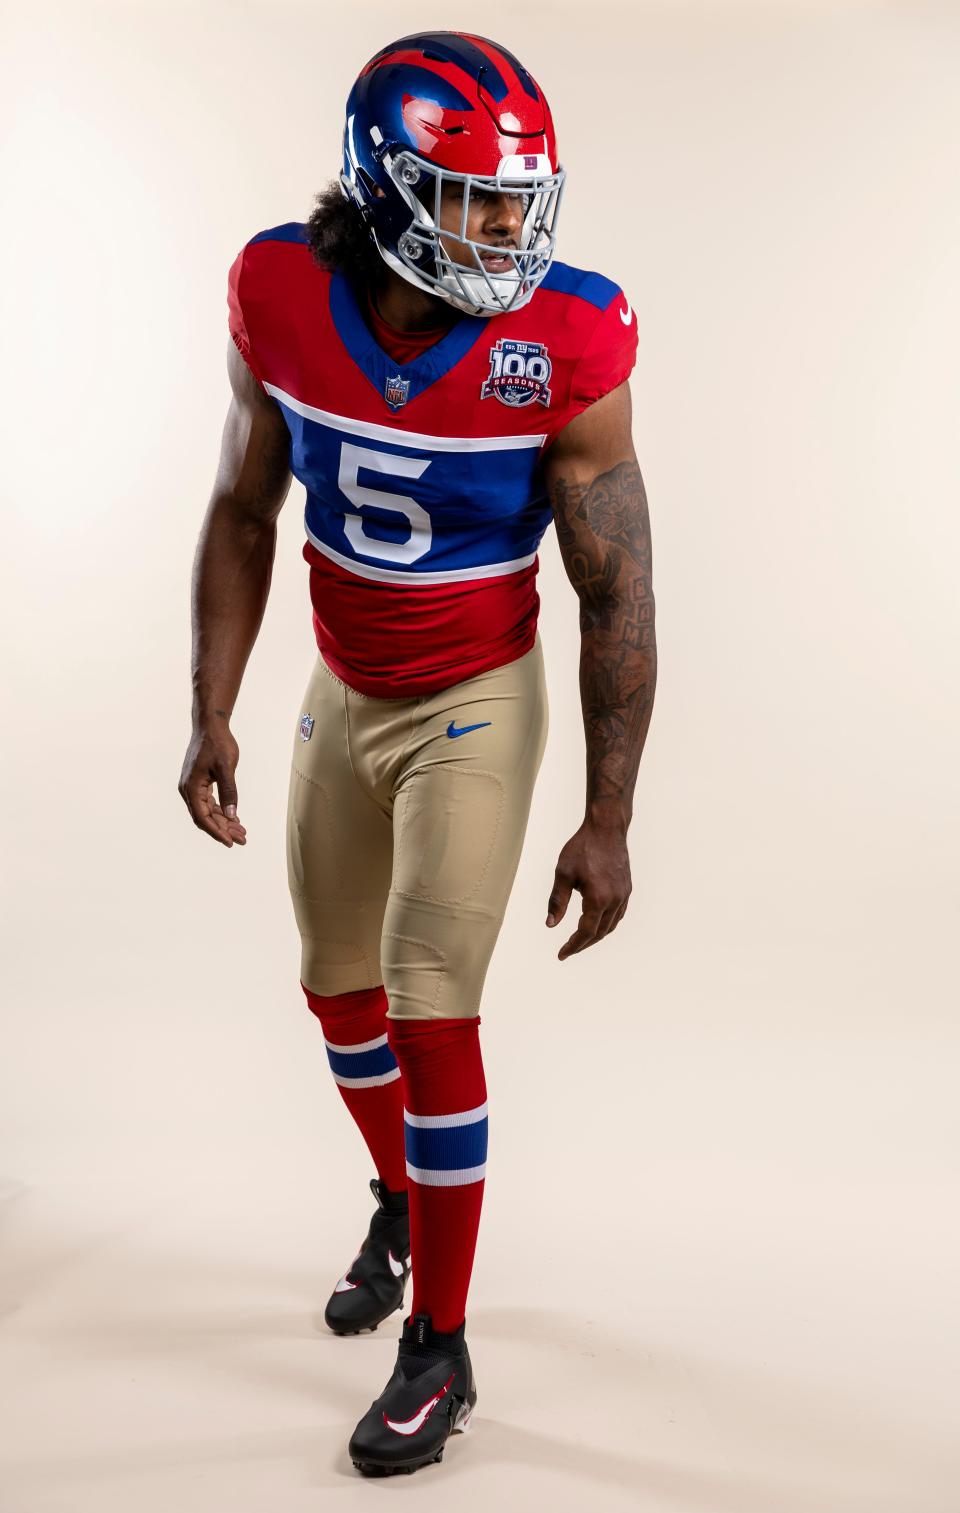 OLB Kayvon Thibodeaux (5) wears the Giants' Century Red uniforms commemorating the franchise's 100th season.